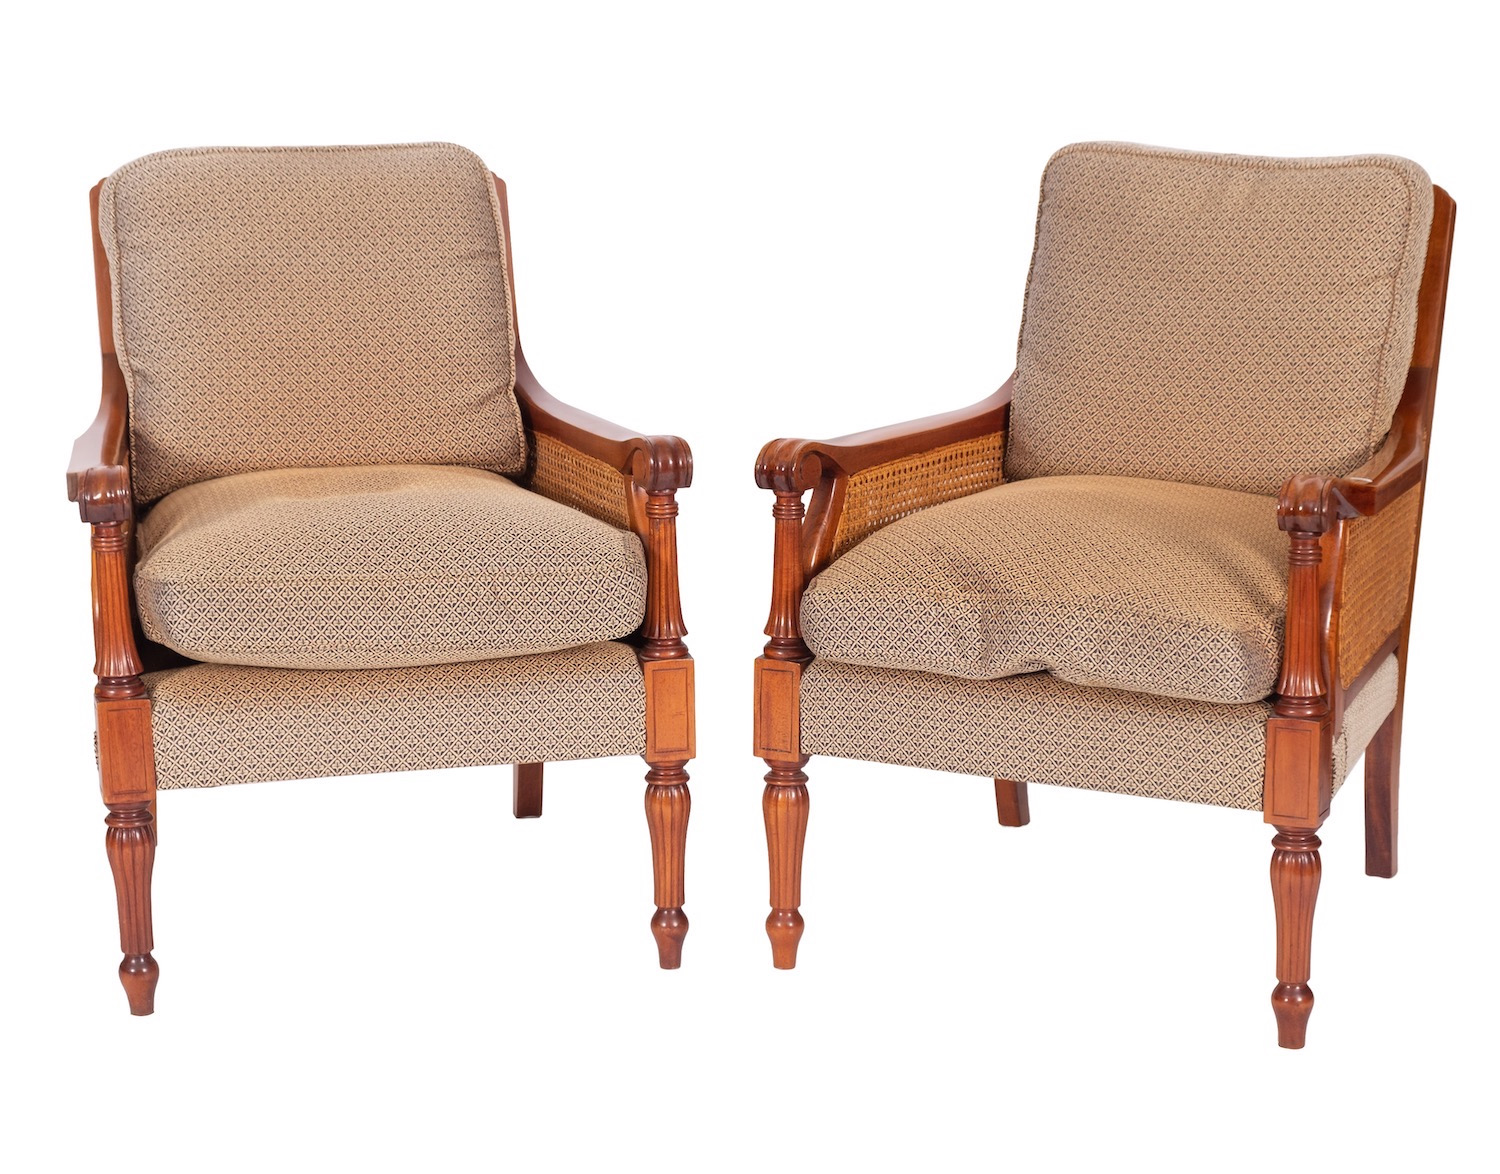 A mahogany and canework bergere suite in 19th century taste, by Brights of Nettlebed, - Image 2 of 2